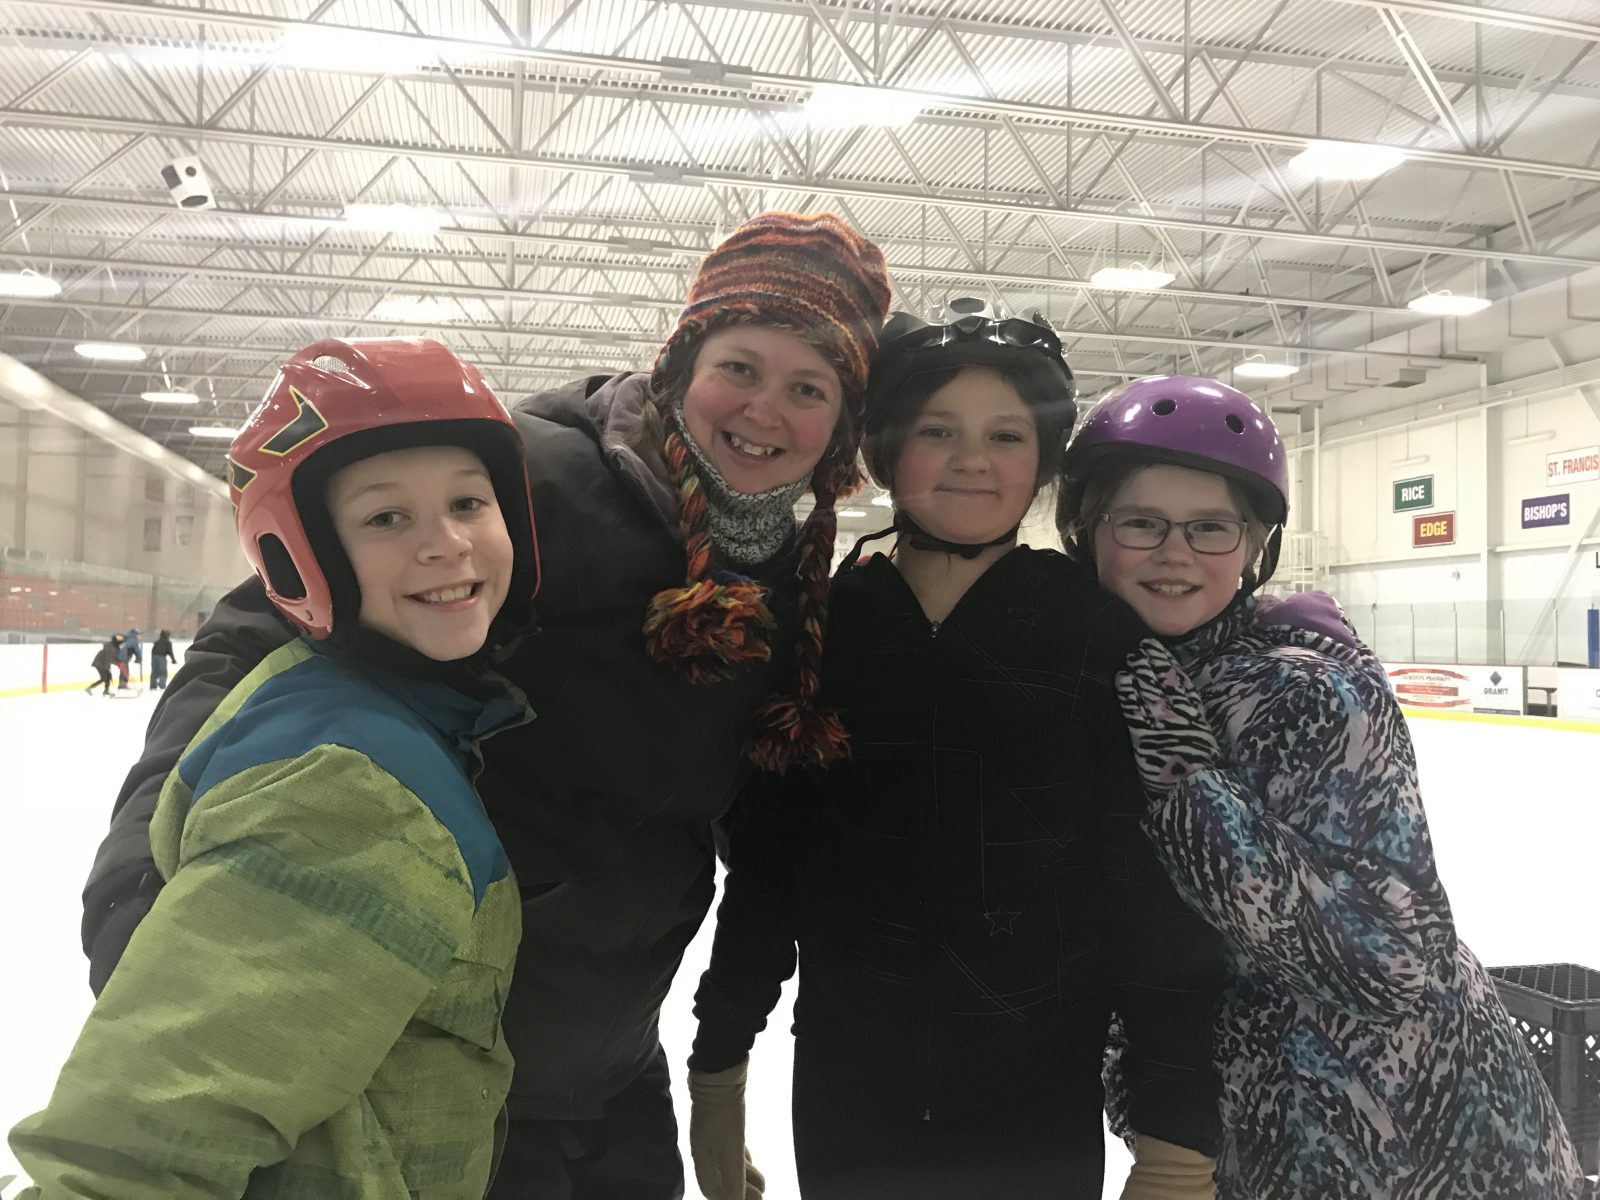 Action-packed winter carnival day at  Sunnyside Elementary School